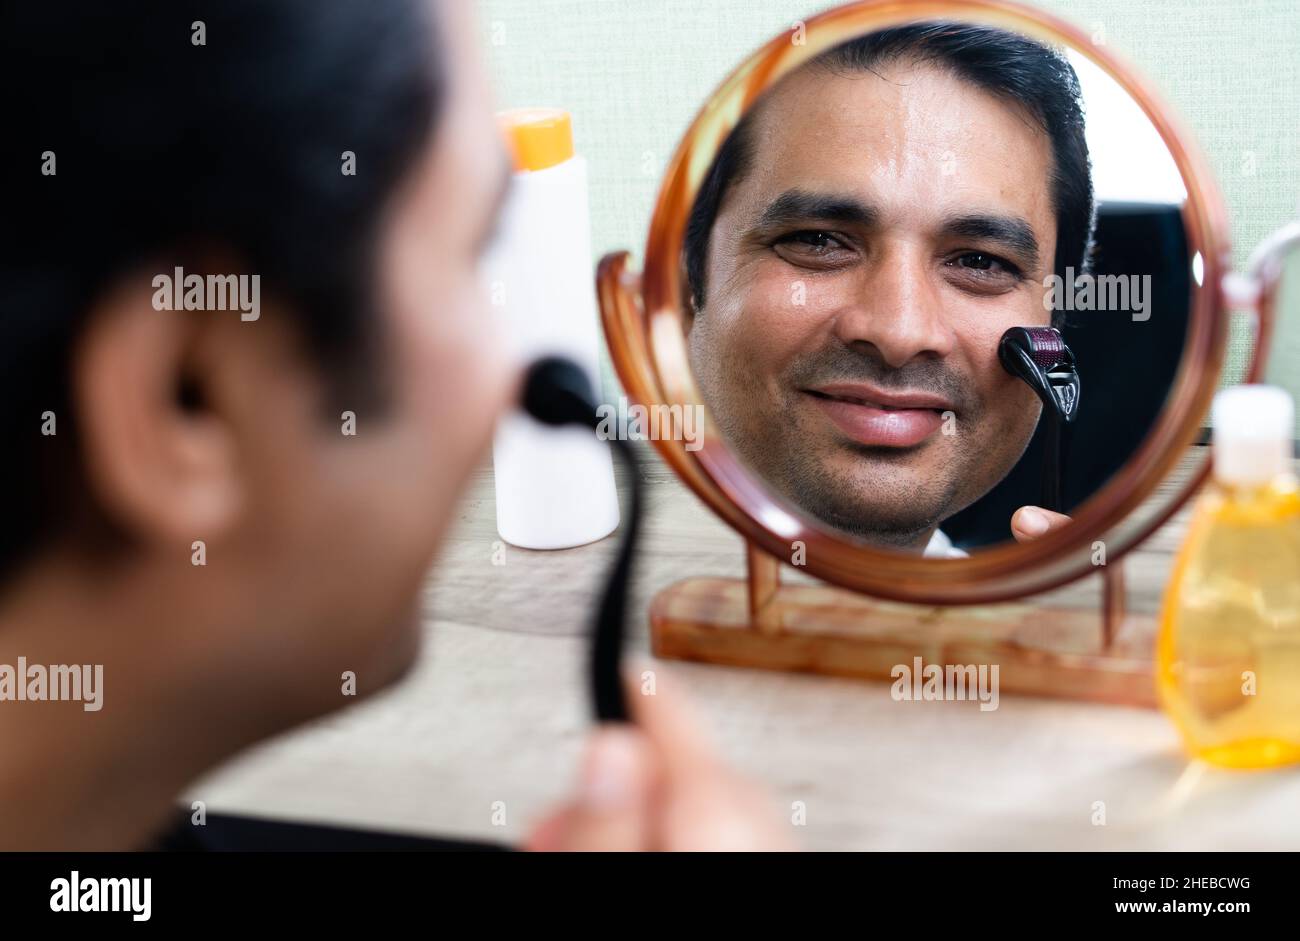 Two way mirror therapy observation studio Stock Photo - Alamy